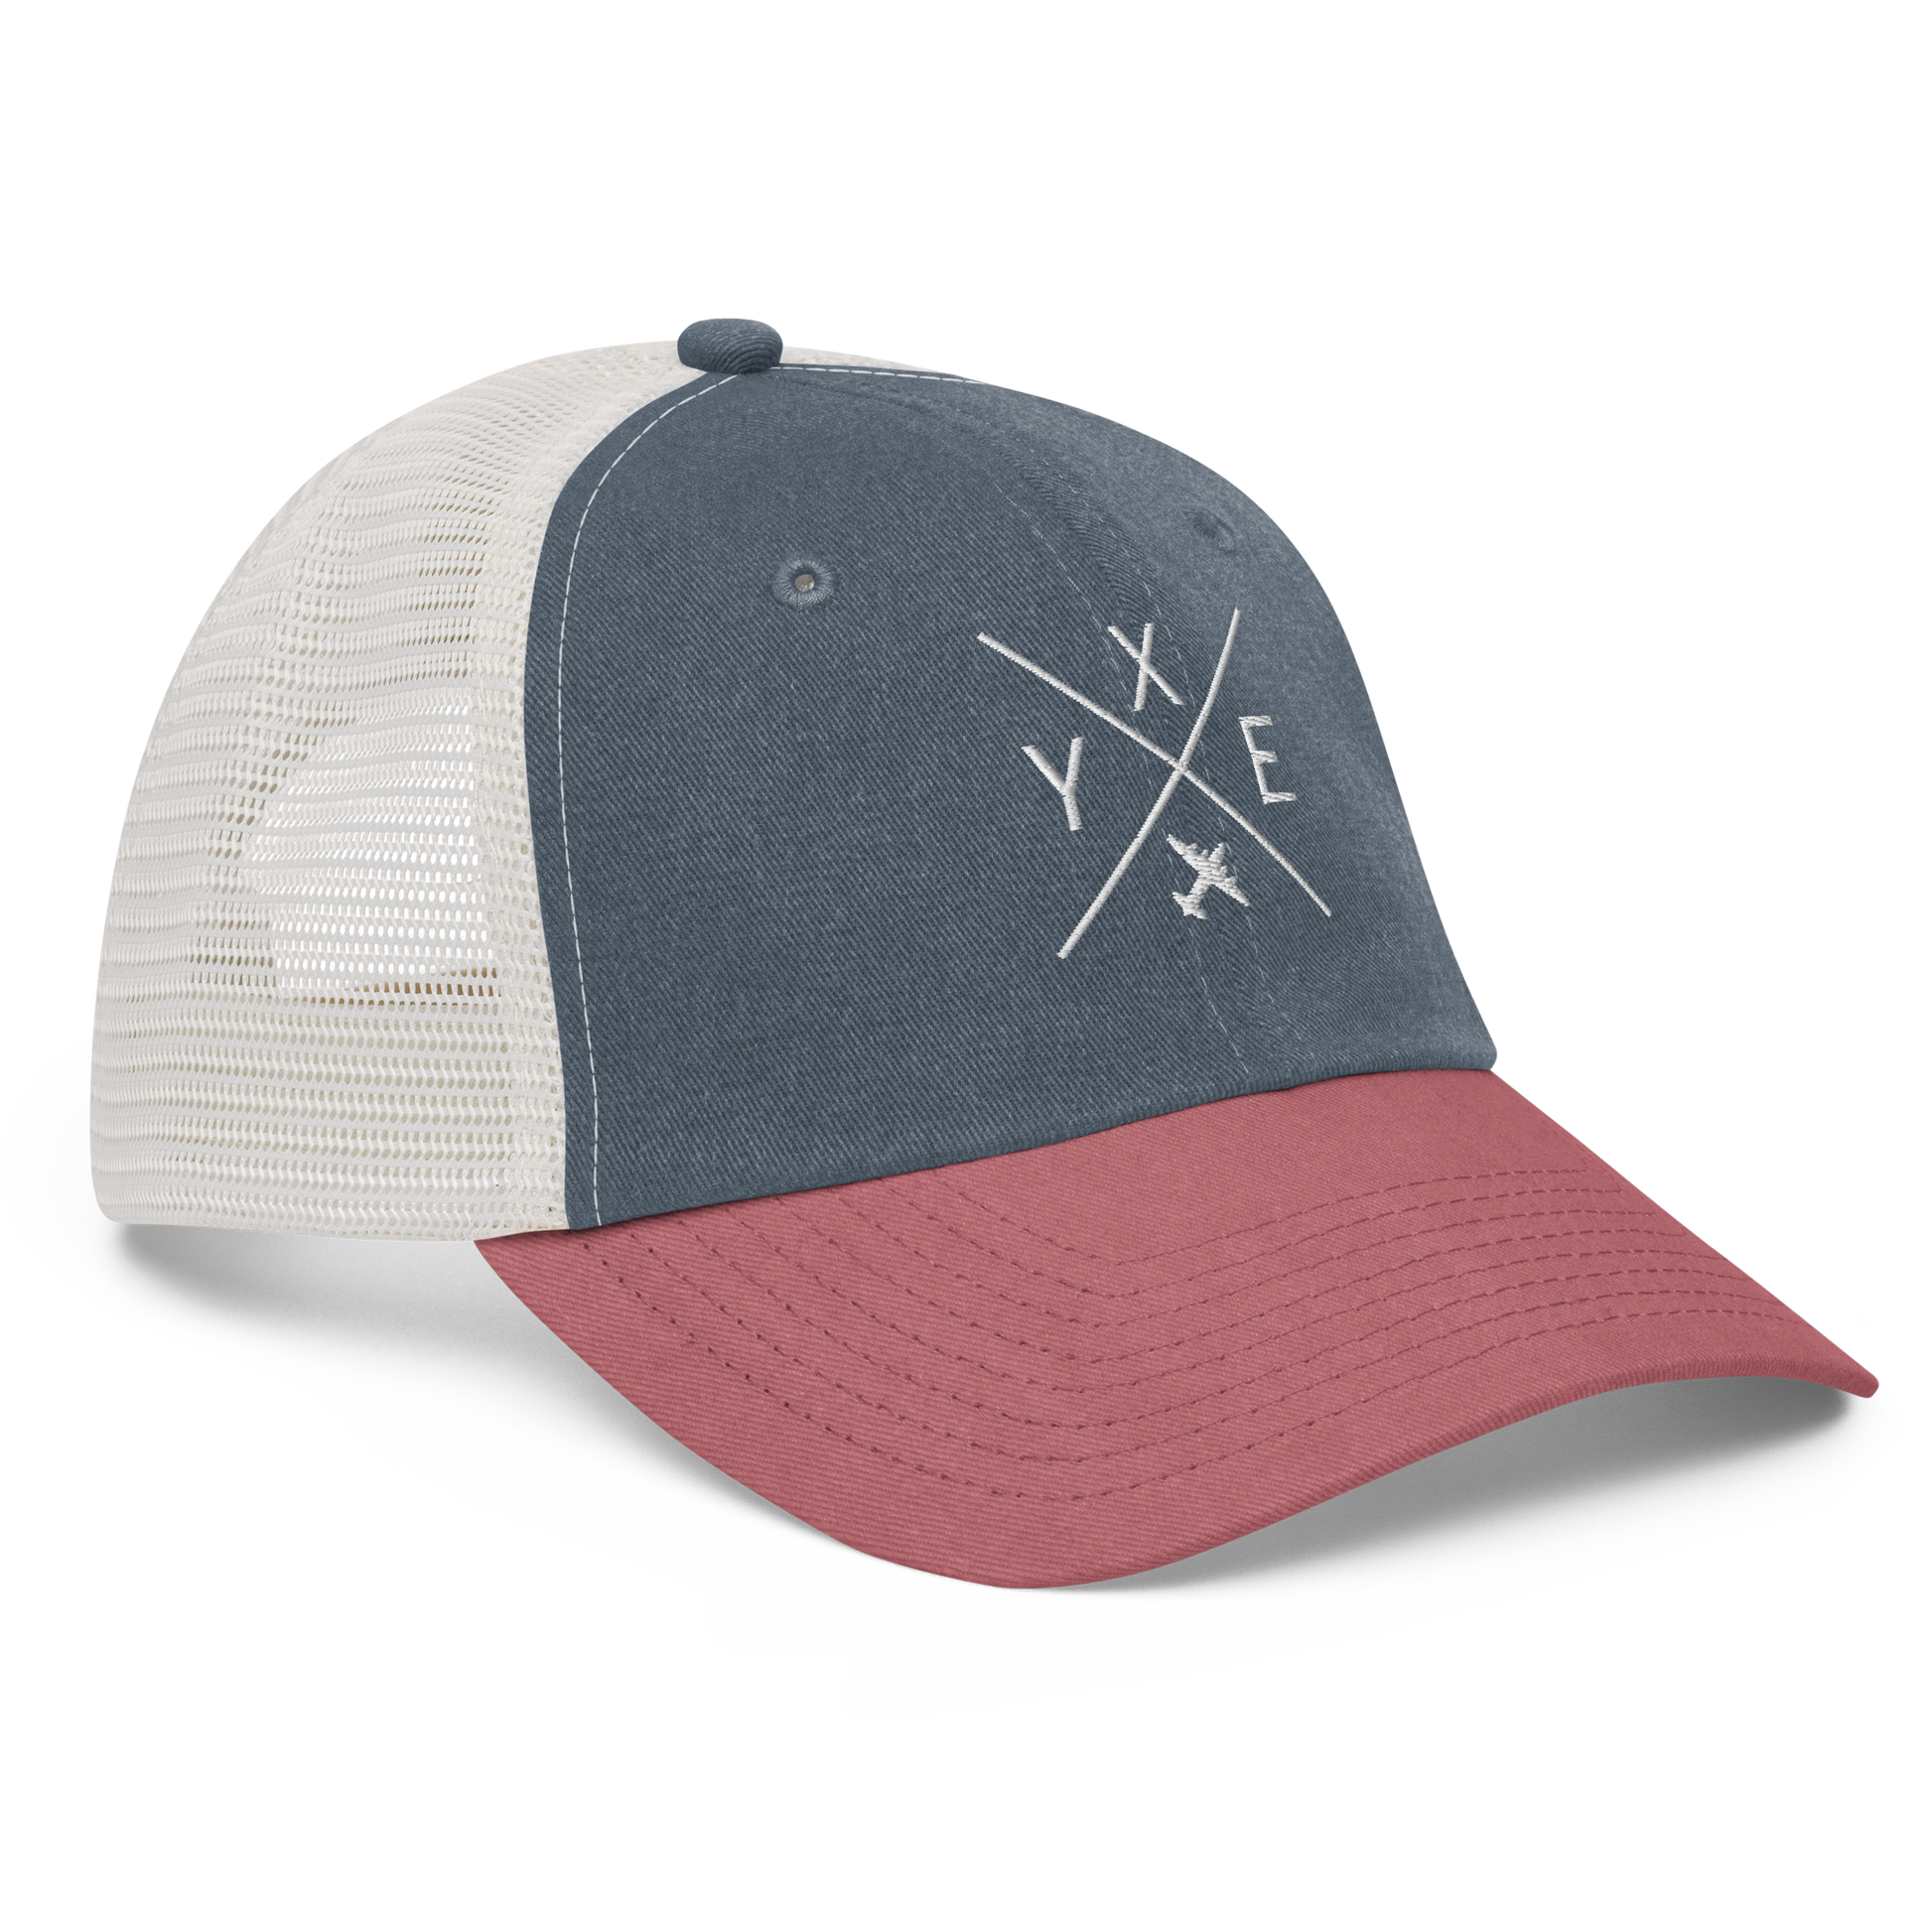 YHM Designs - YXE Saskatoon Pigment-Dyed Trucker Cap - Crossed-X Design with Airport Code and Vintage Propliner - White Embroidery - Image 13